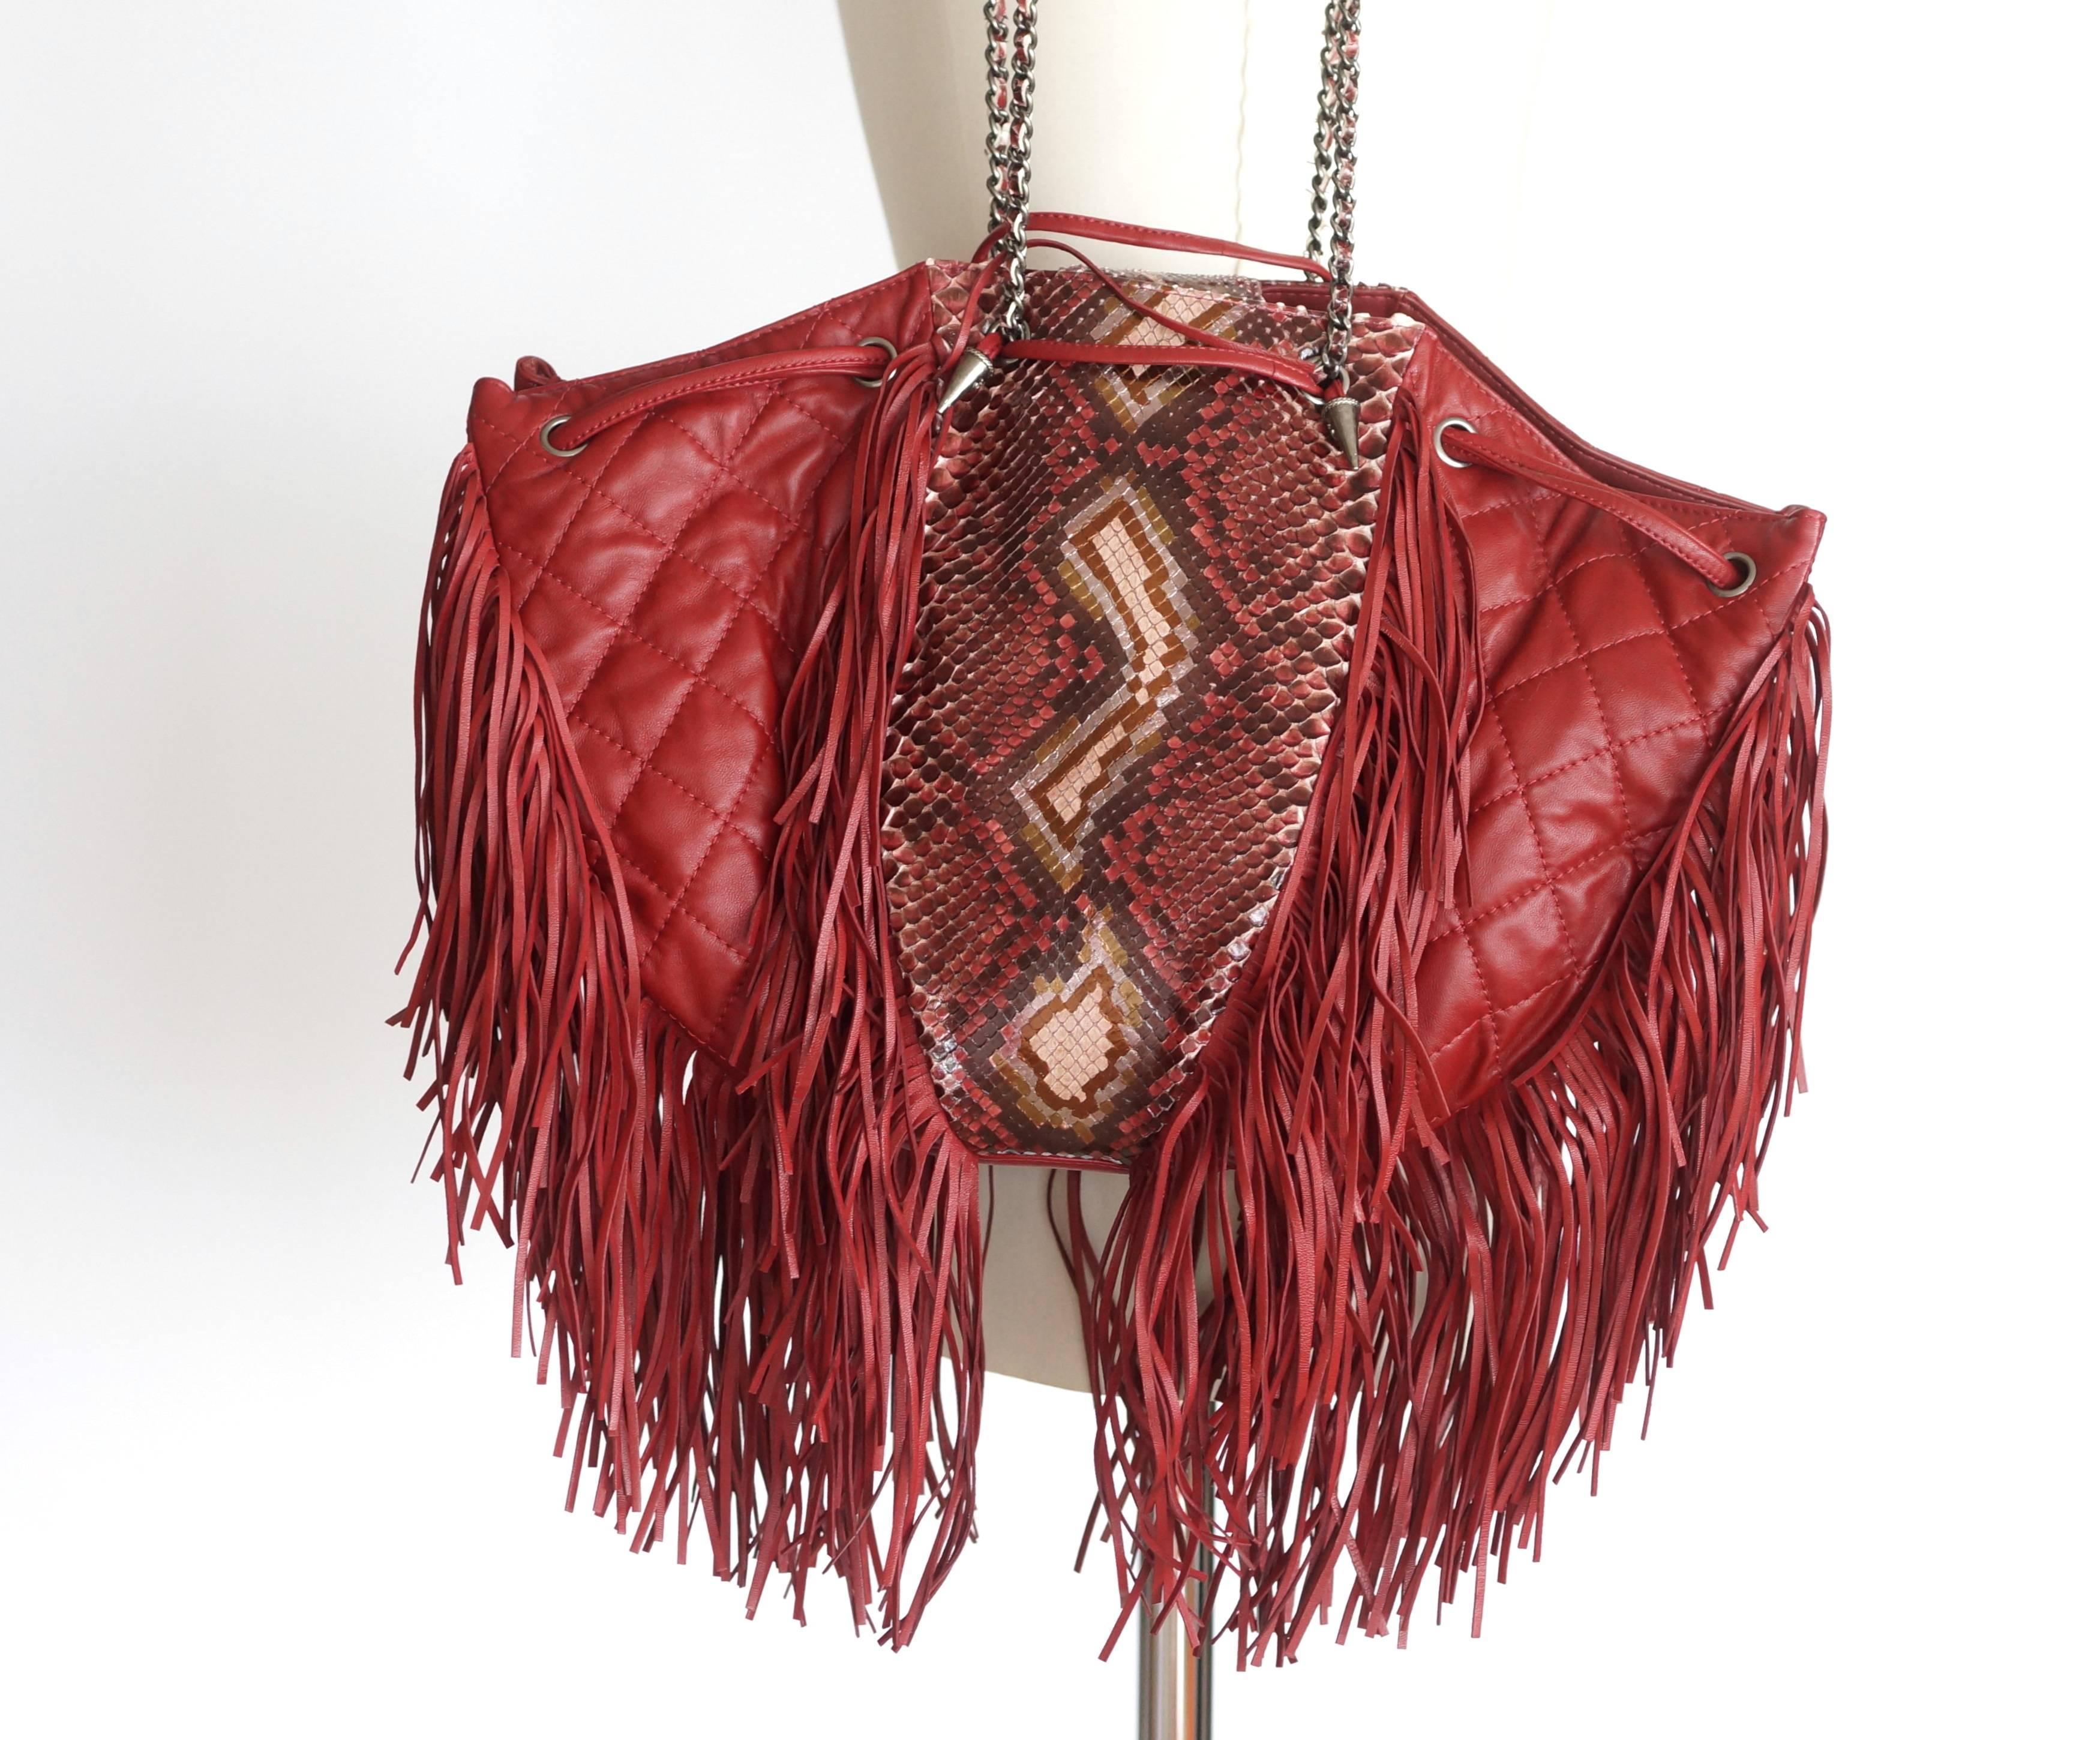 Guaranteed authentic Chanel Dallas Collection Drawstring Fringe shoulder bag with signature chain link shoulder straps.
Presented in the brand's Paris-Dallas Metiers d'Art 2013-2014 Collection it brings a flair of Americana.
Quilted in claret red